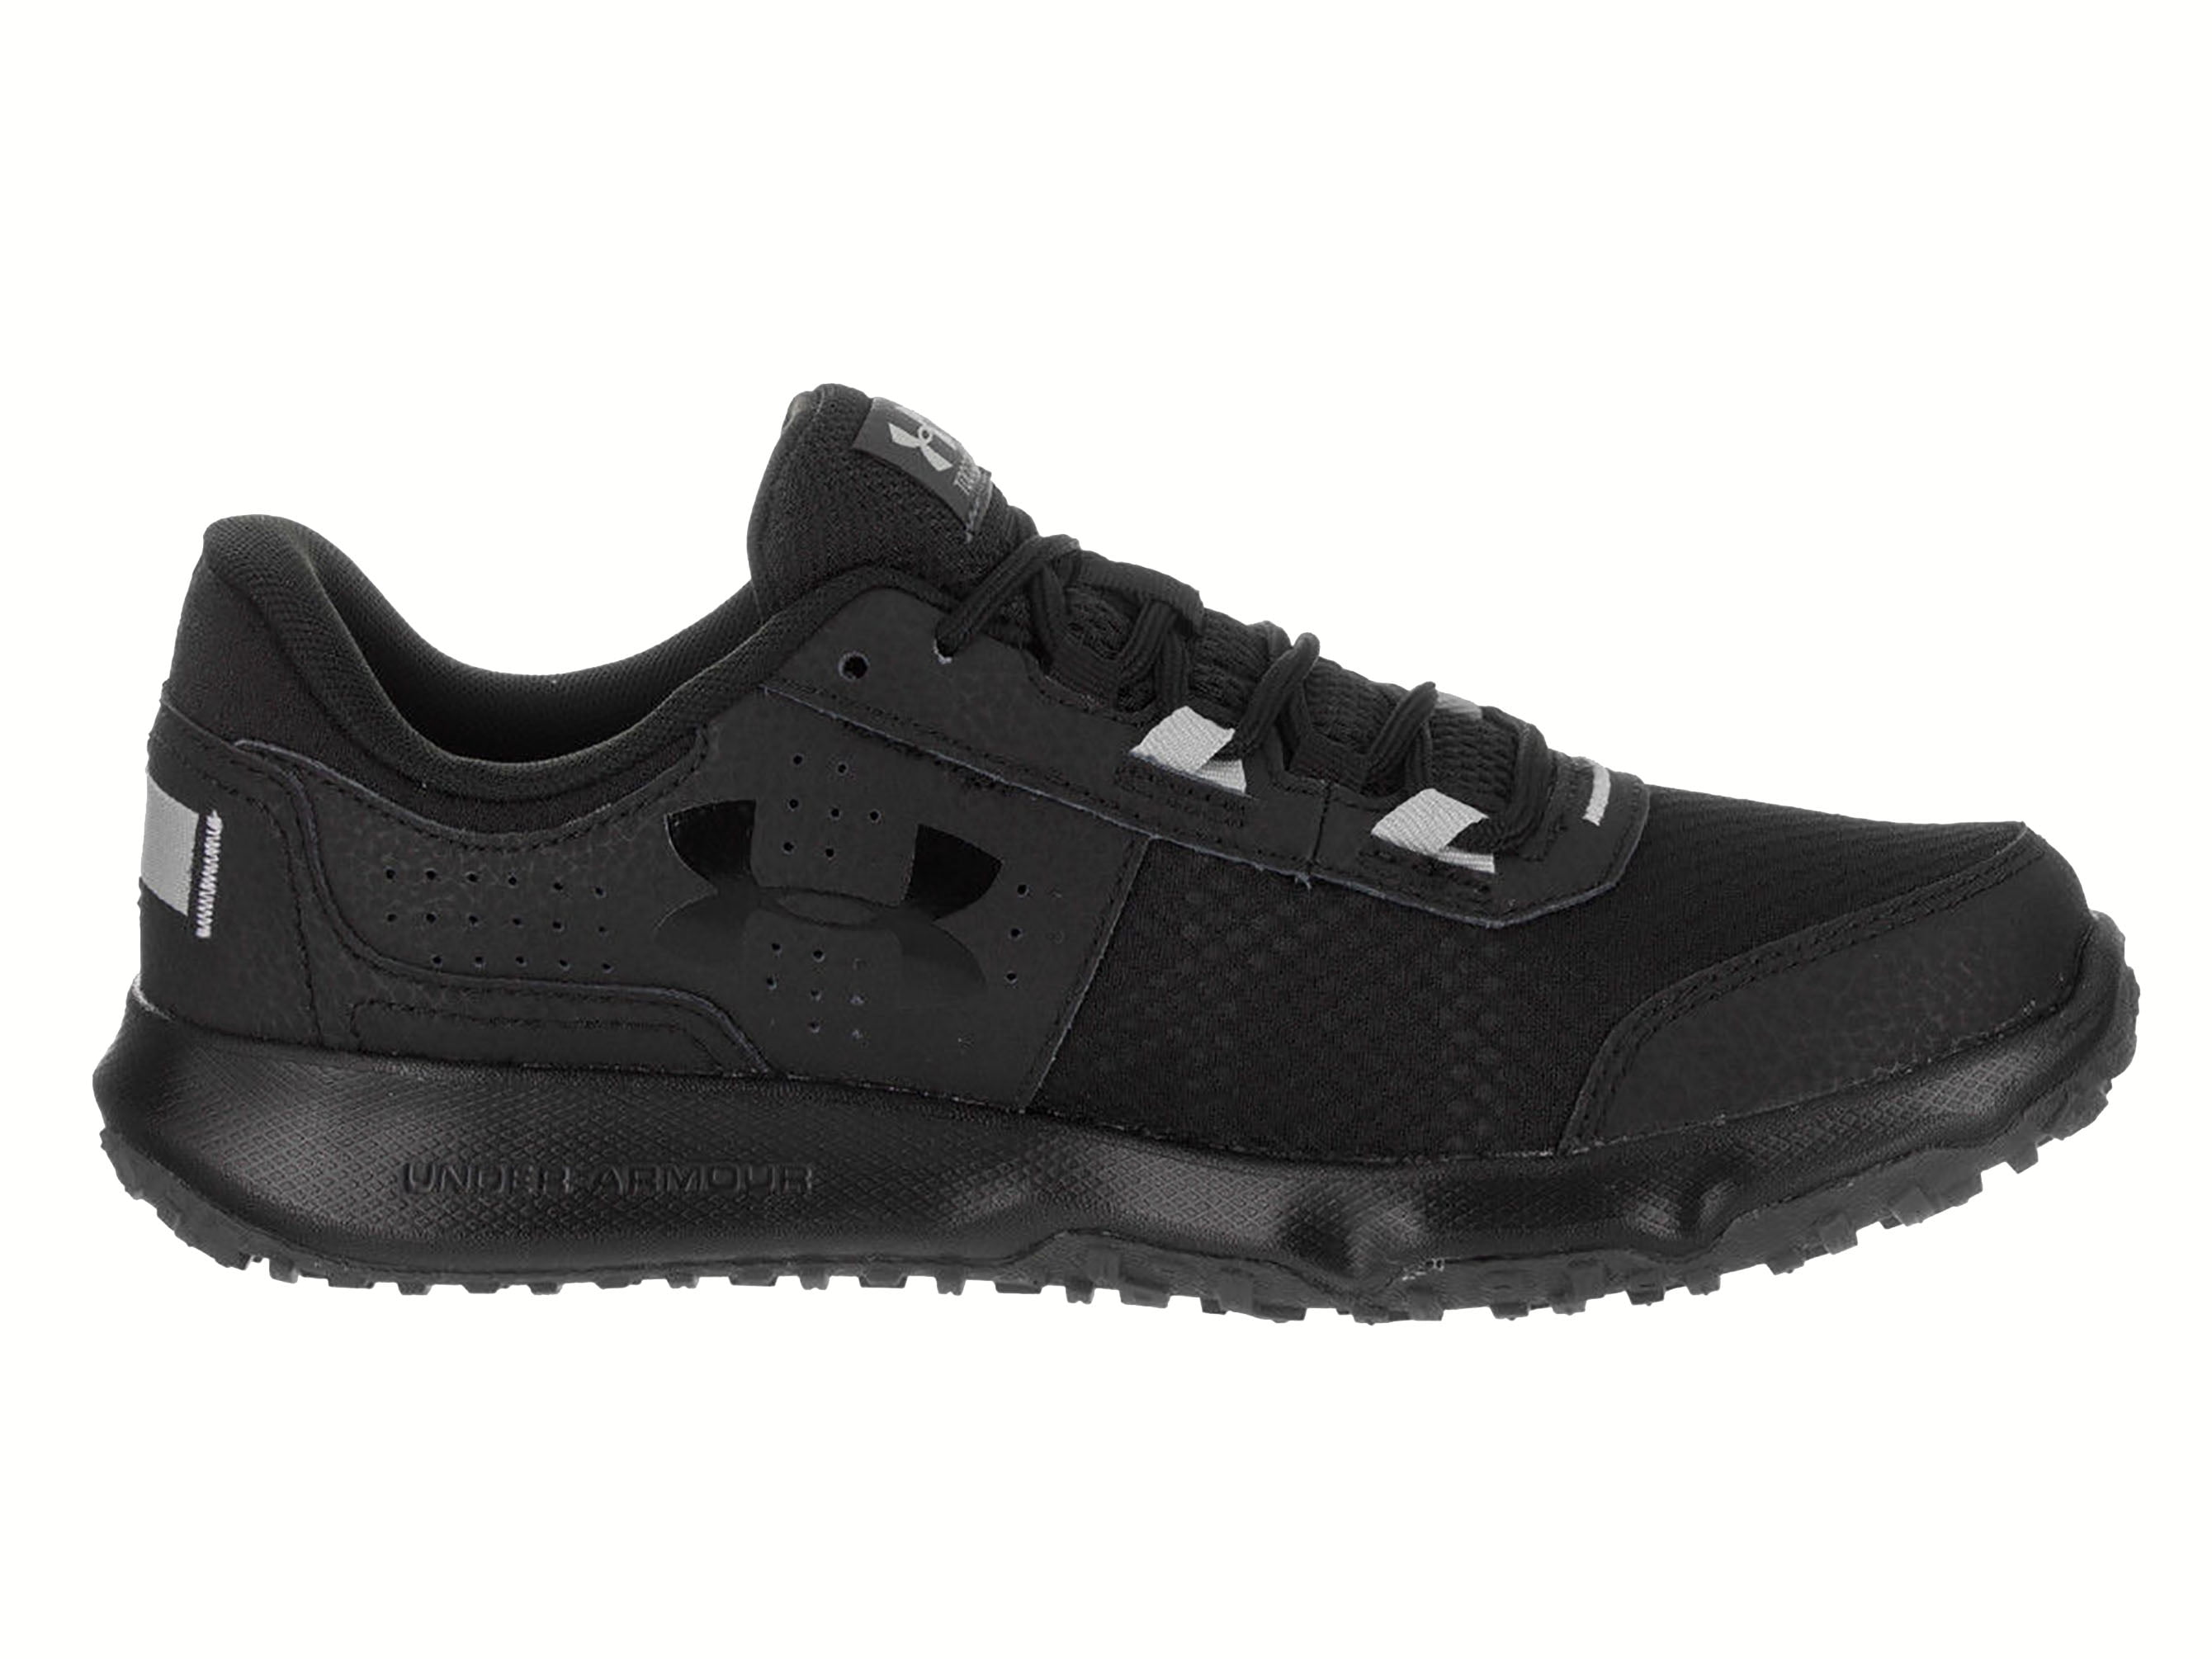 Running Shoes Stealth Gray/Black Size 